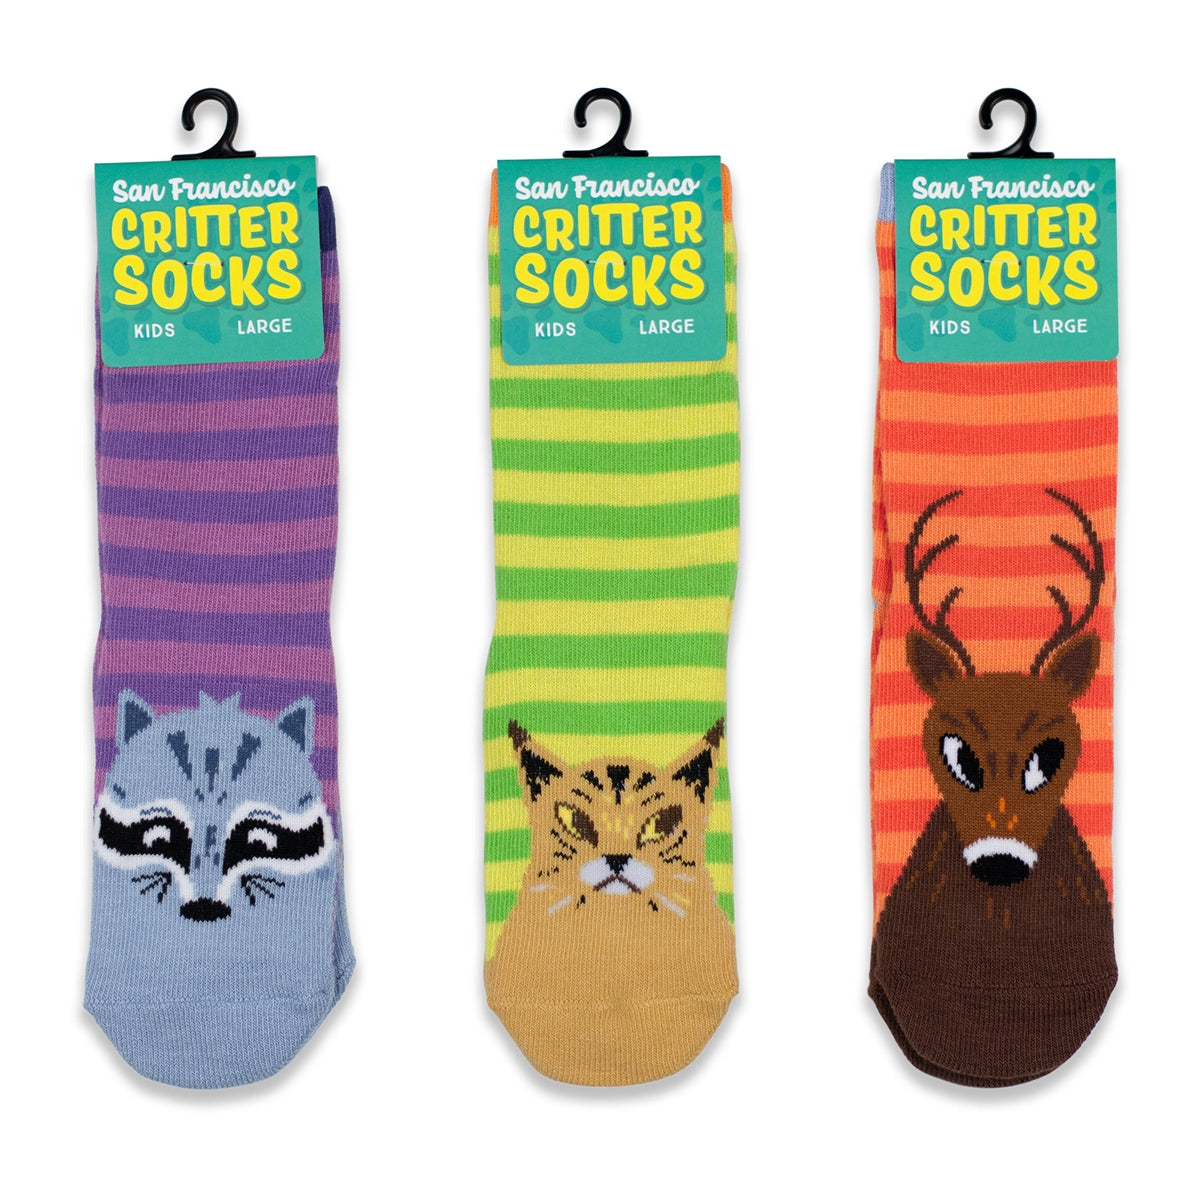 Multicolor striped yellow-green San Francisco Critter kids socks, with bobcat design and non-skid "tracks" feature on sole.